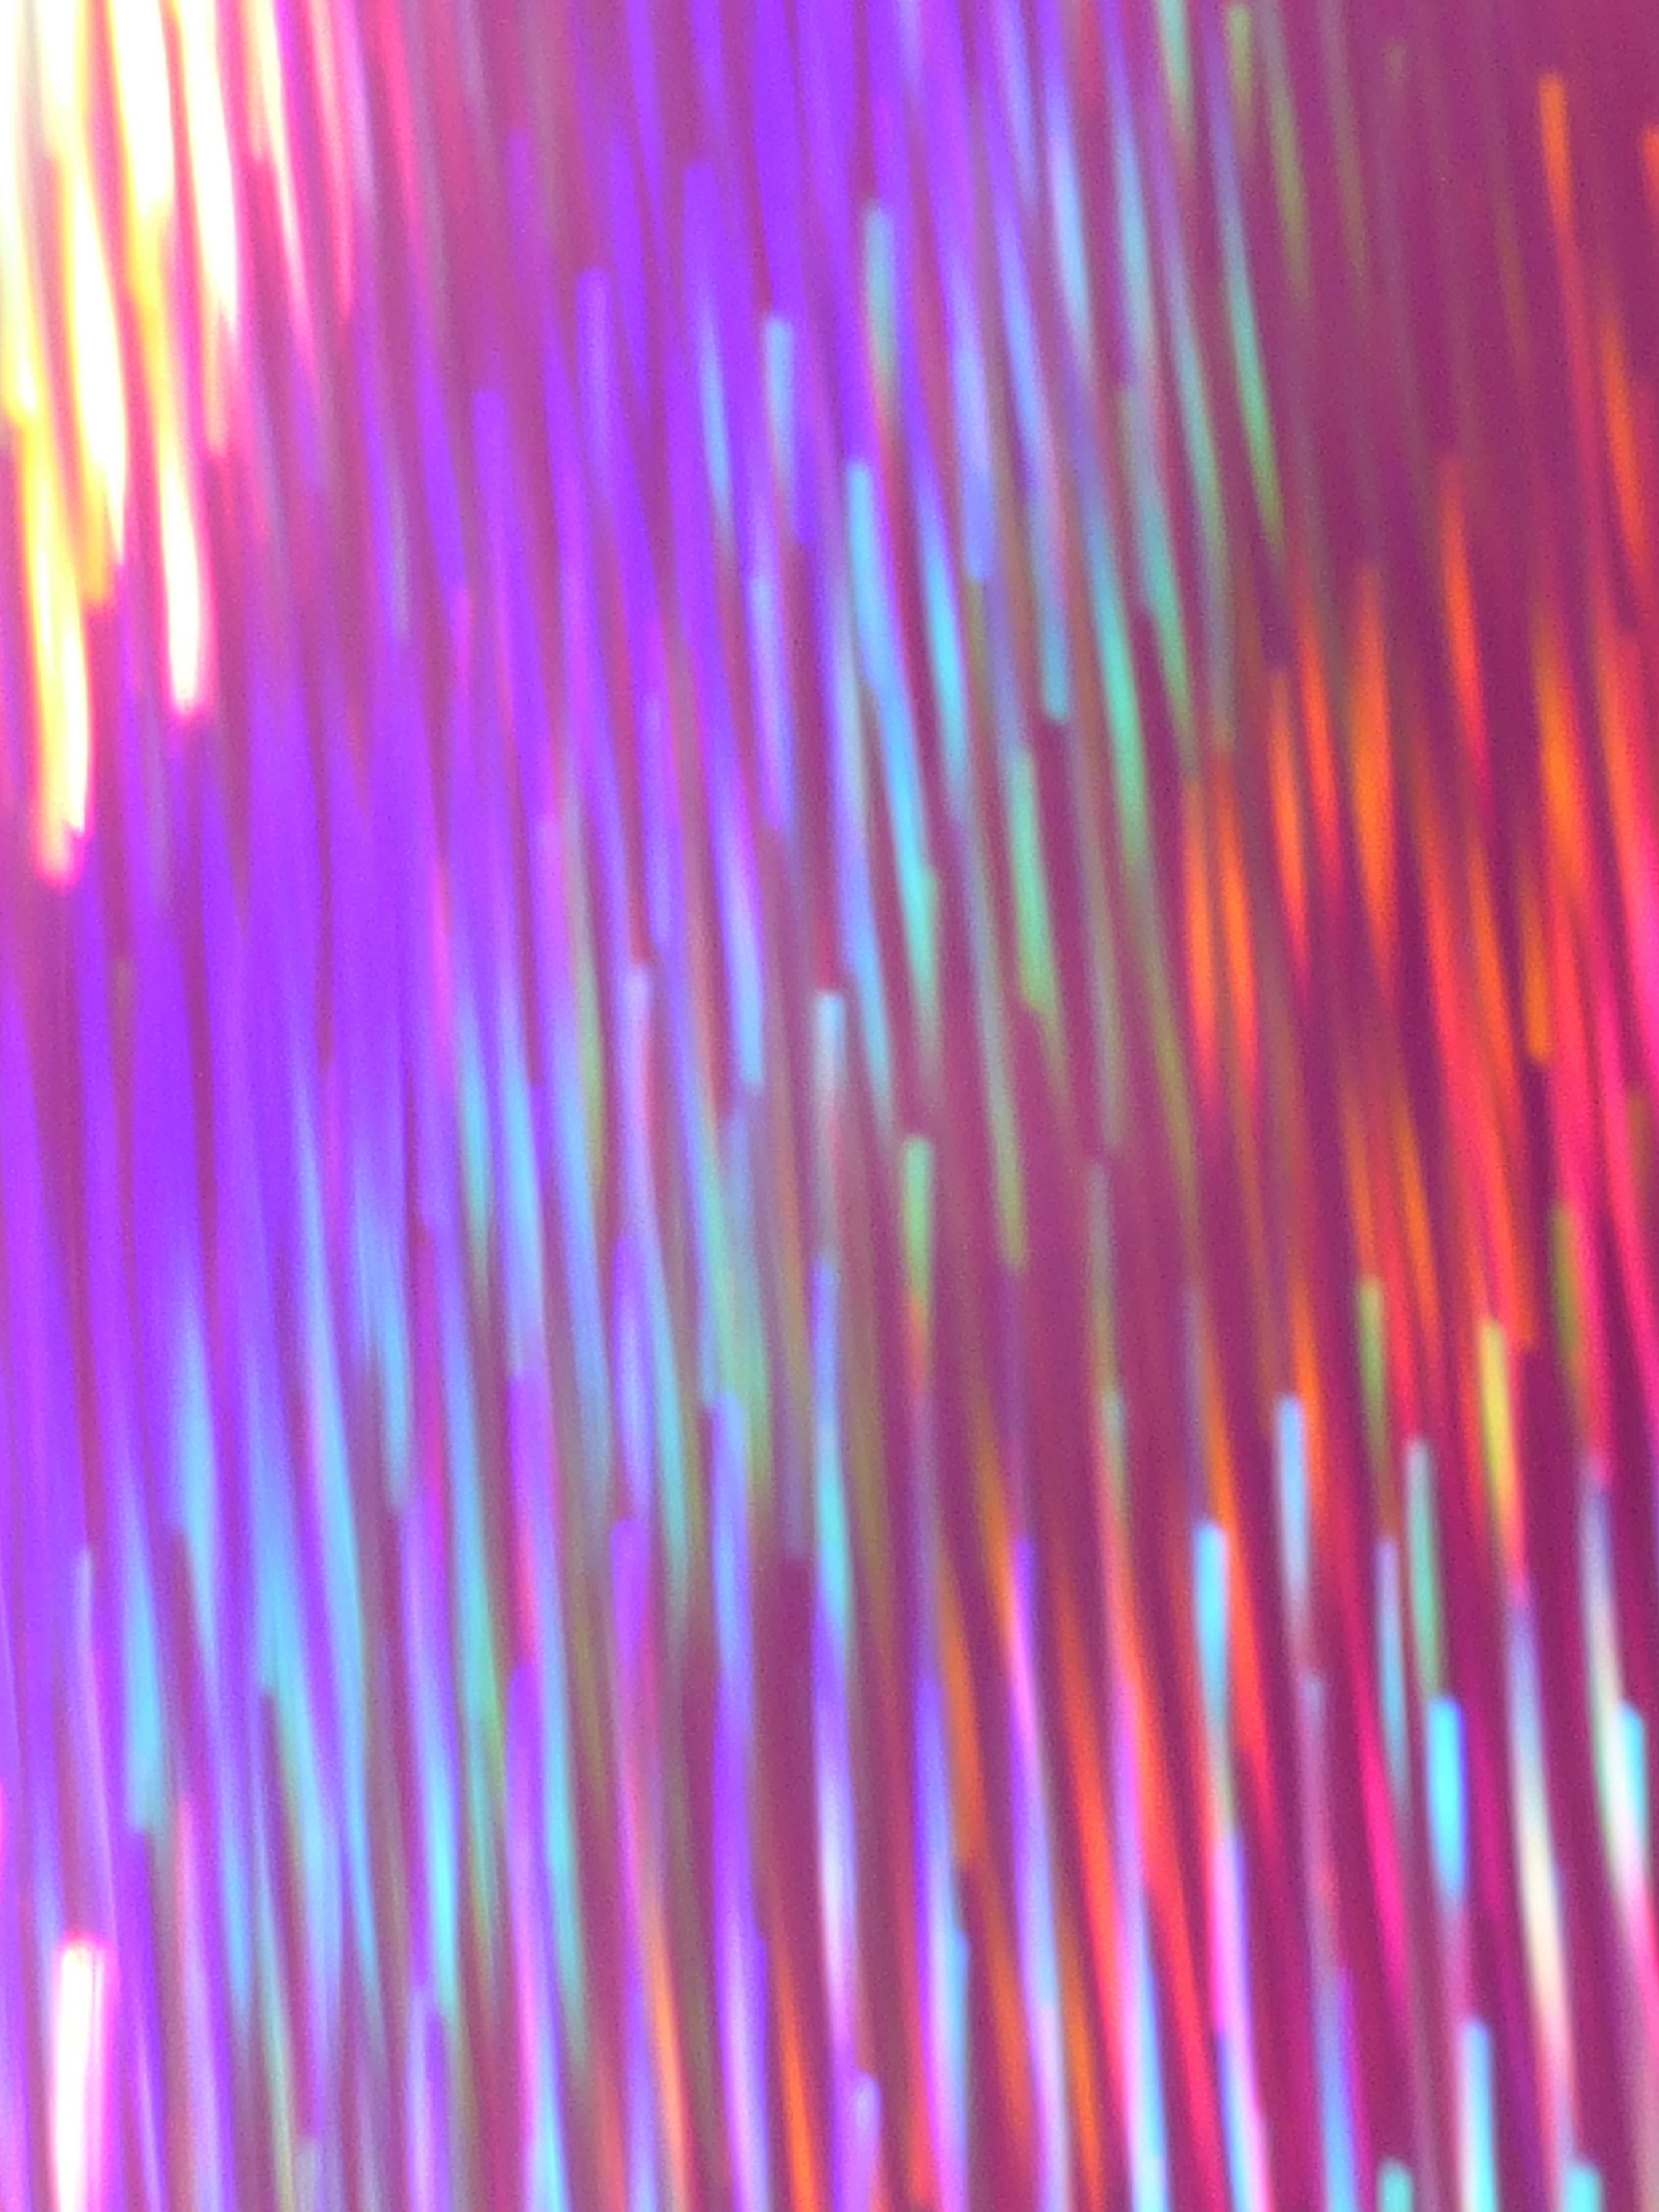 Motion blur with streaks of pink and purple light-9427 | Stockarch ...